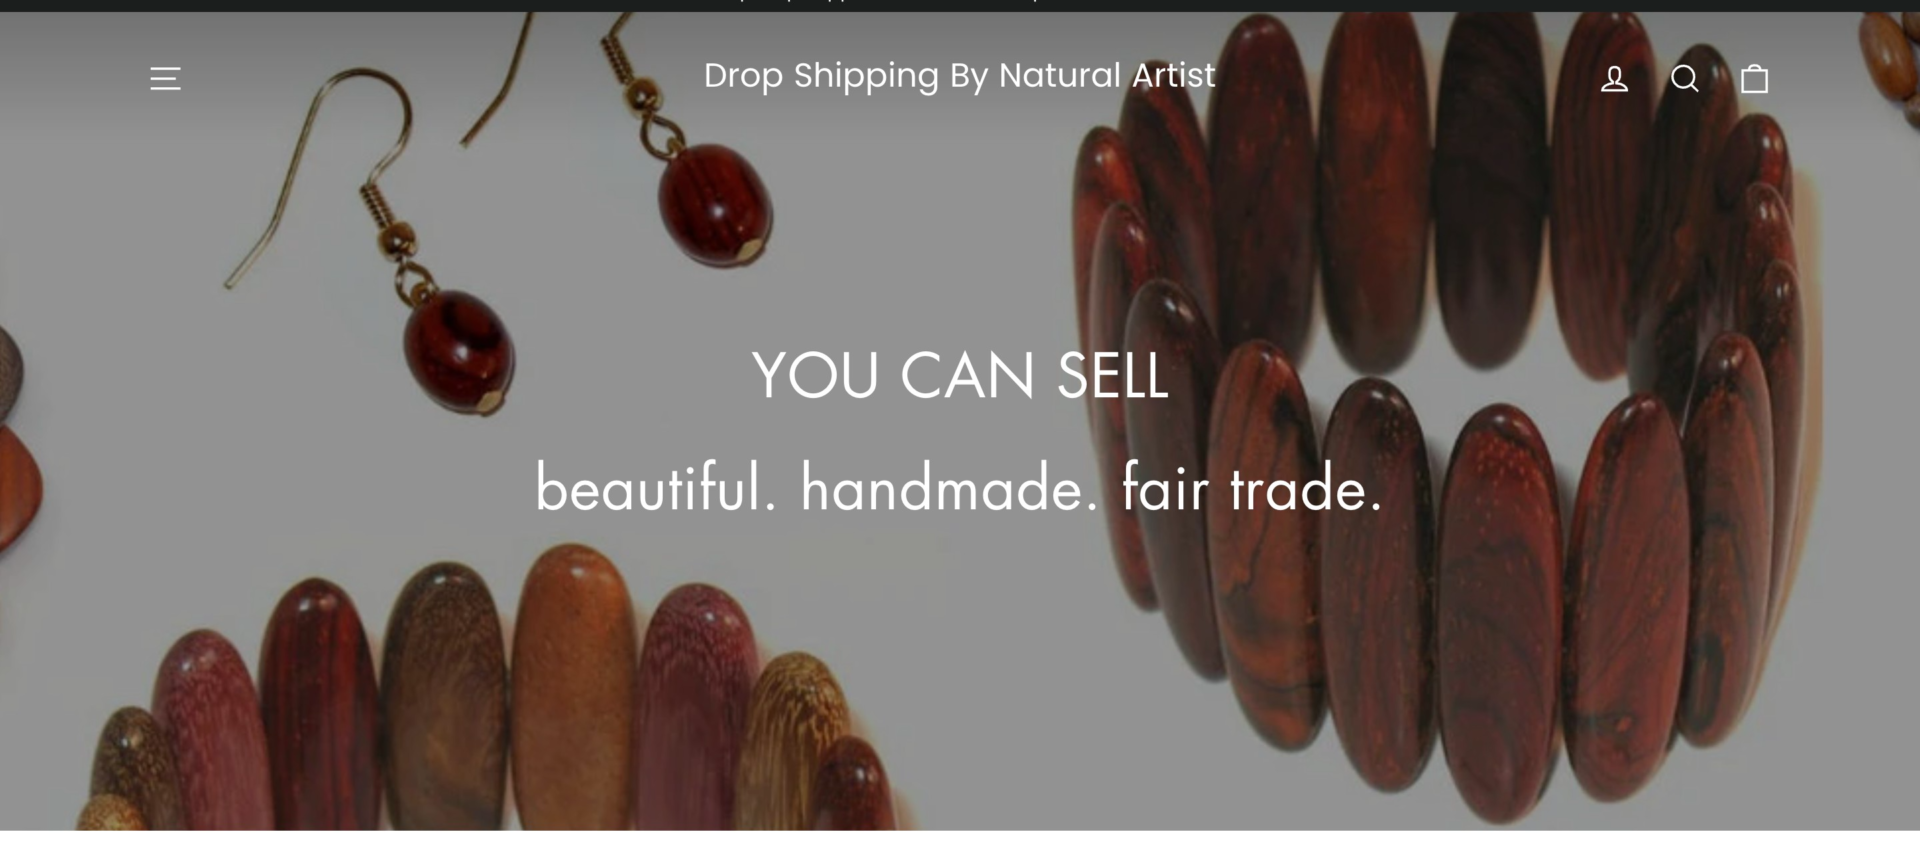 Drop Shipping By Natural Artist 